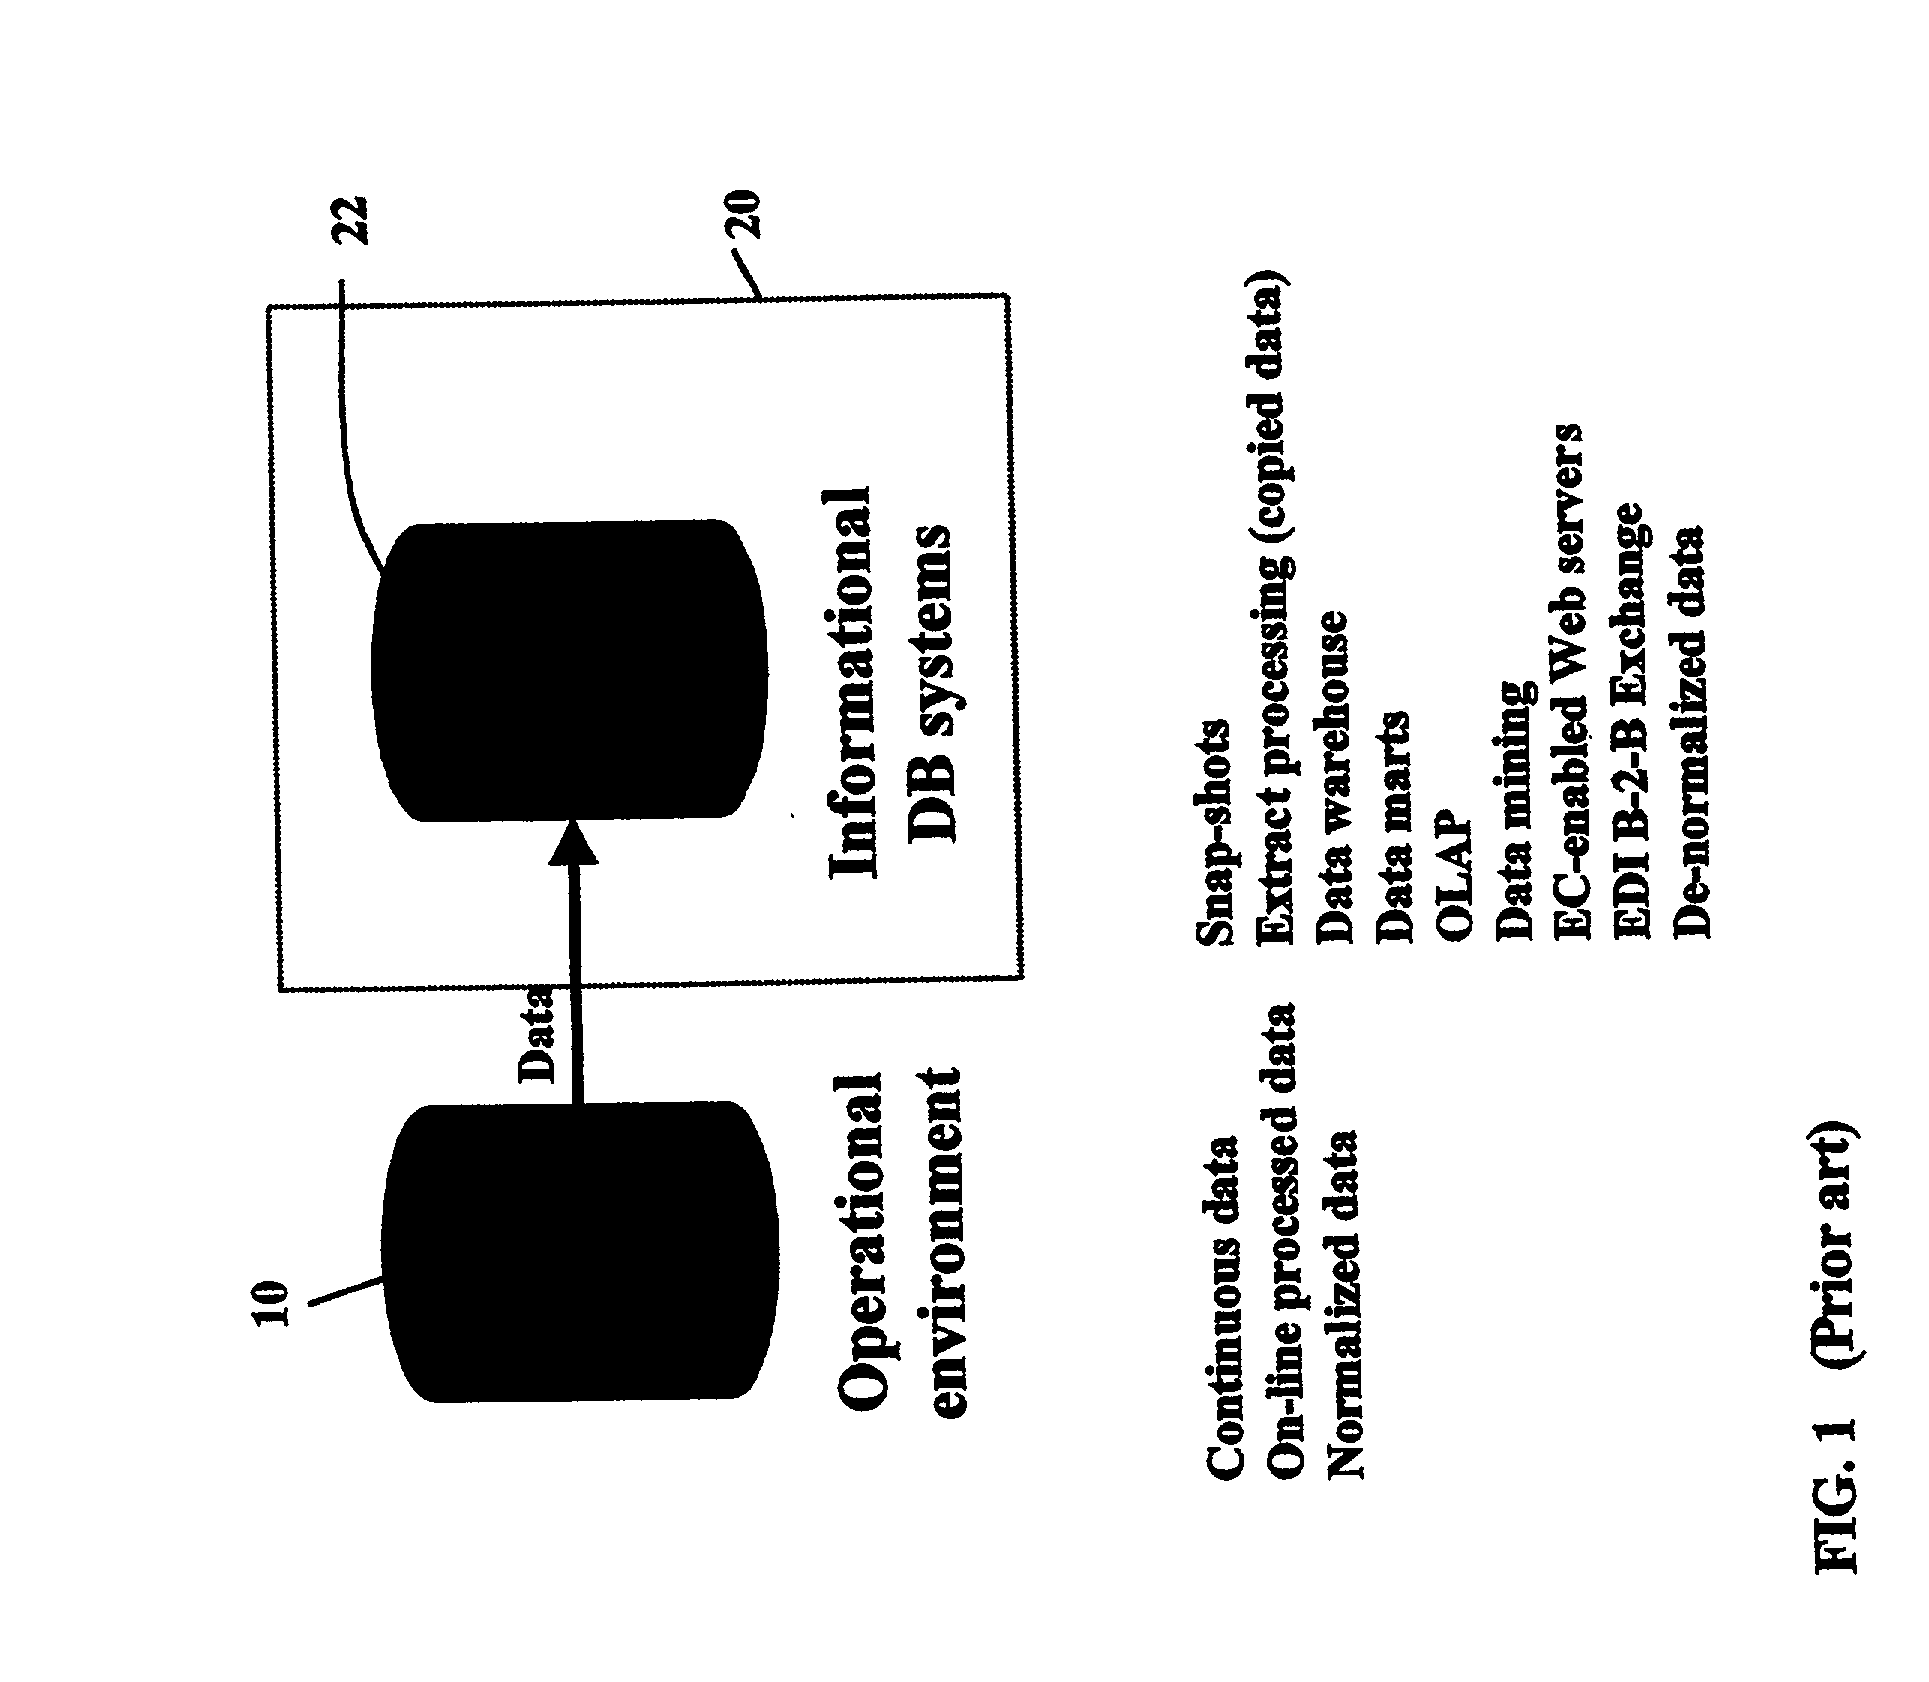 Relational database management system having integrated non-relational multi-dimensional data store of aggregated data elements